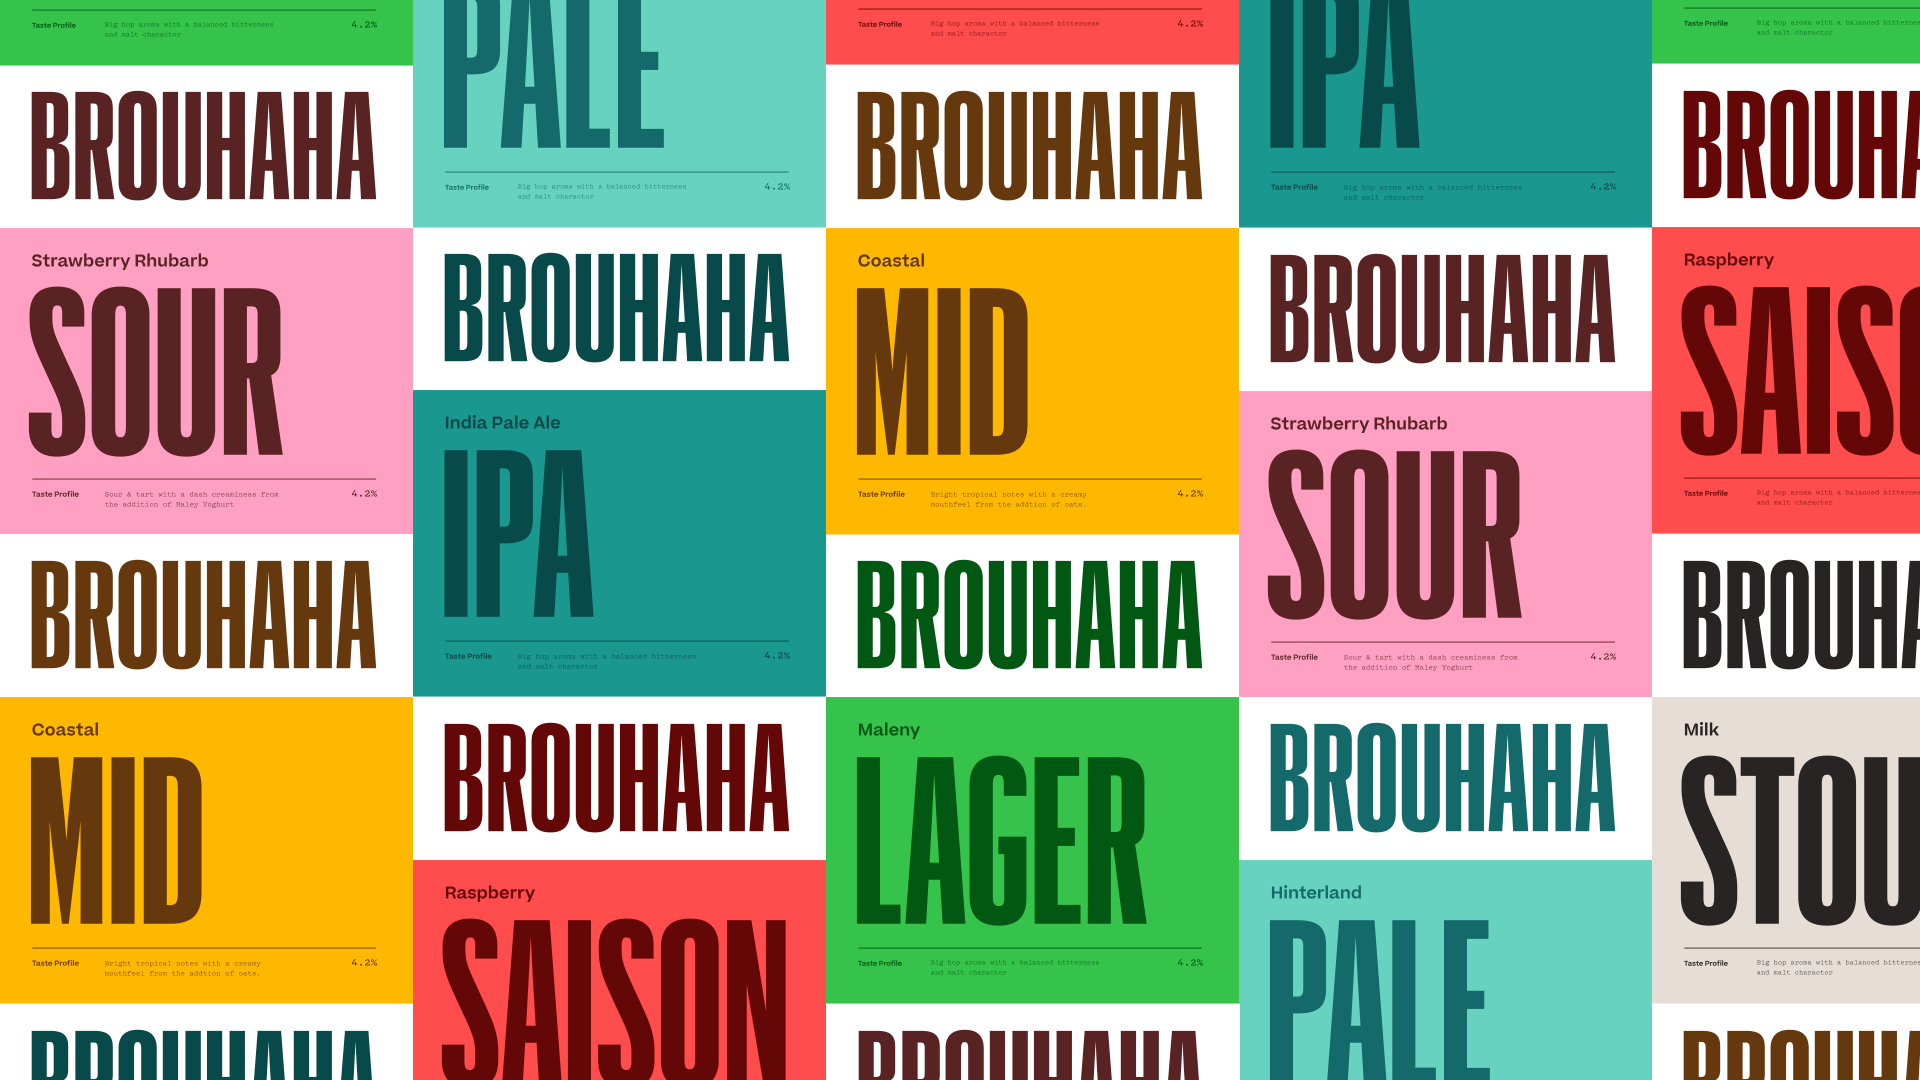 Contemporary design for beer cans, featuring bold typography and an extended colour palette